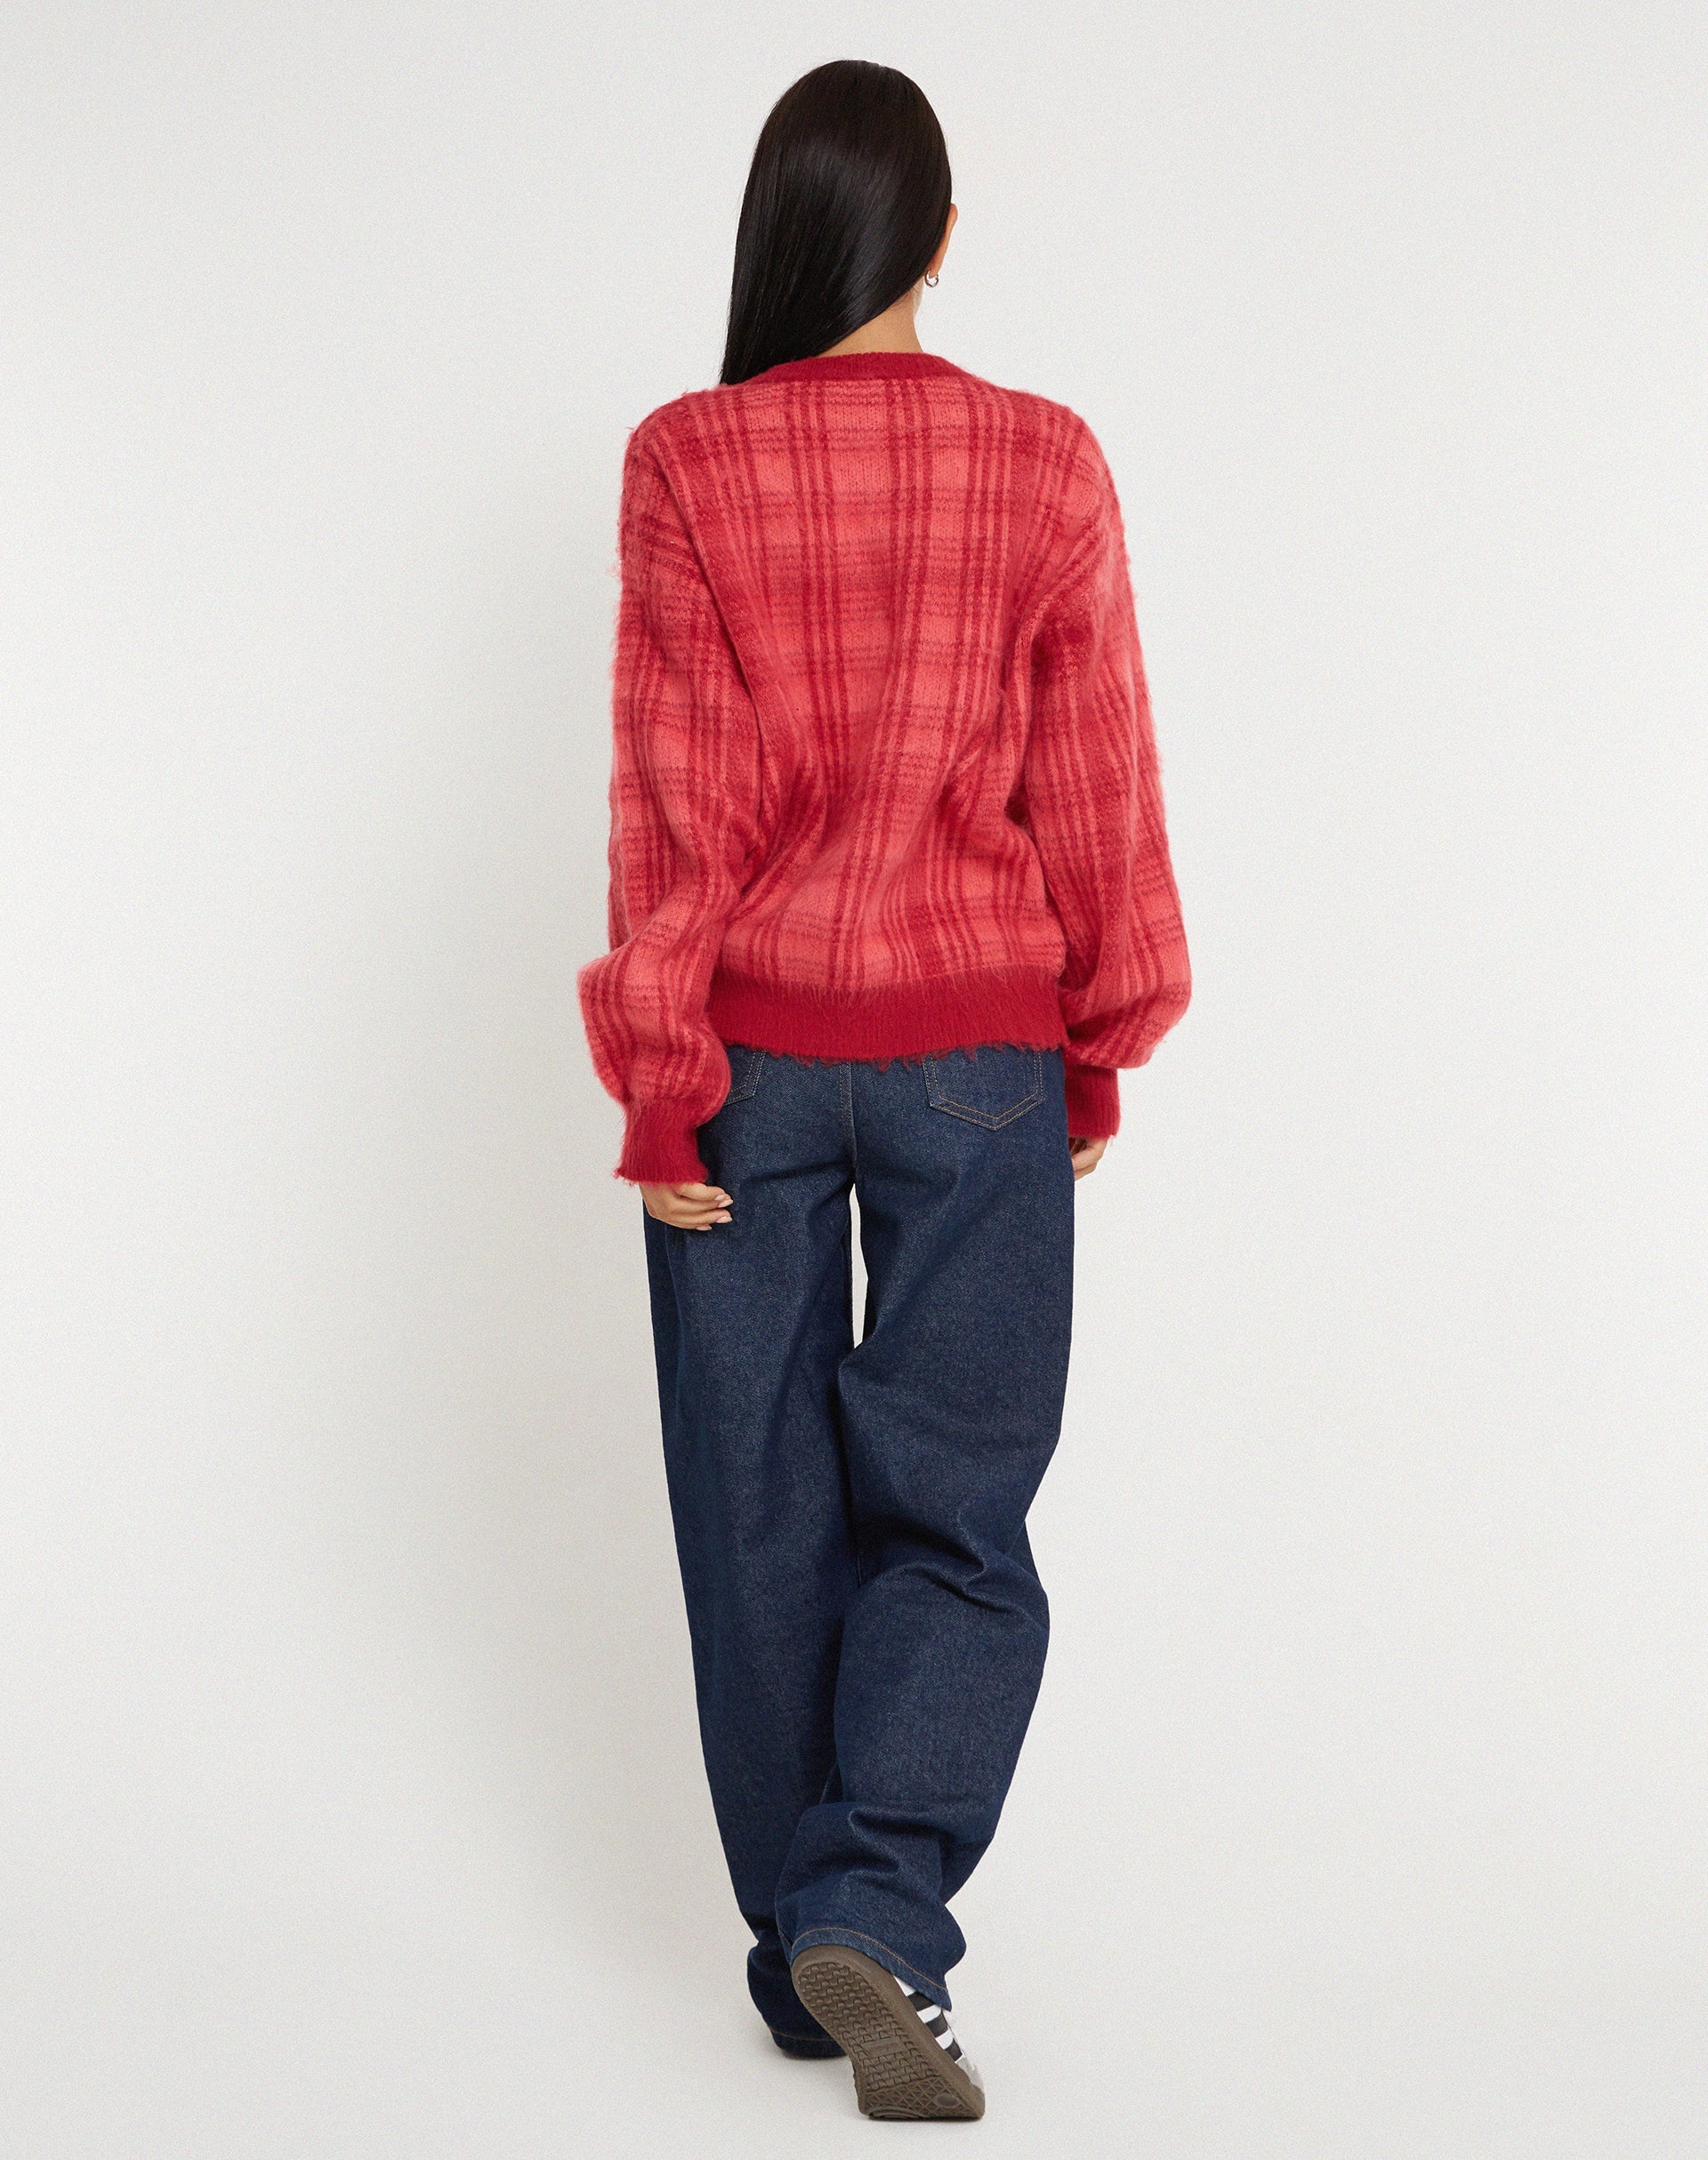 image of Mihail Knitted Jumper in Red and Pink